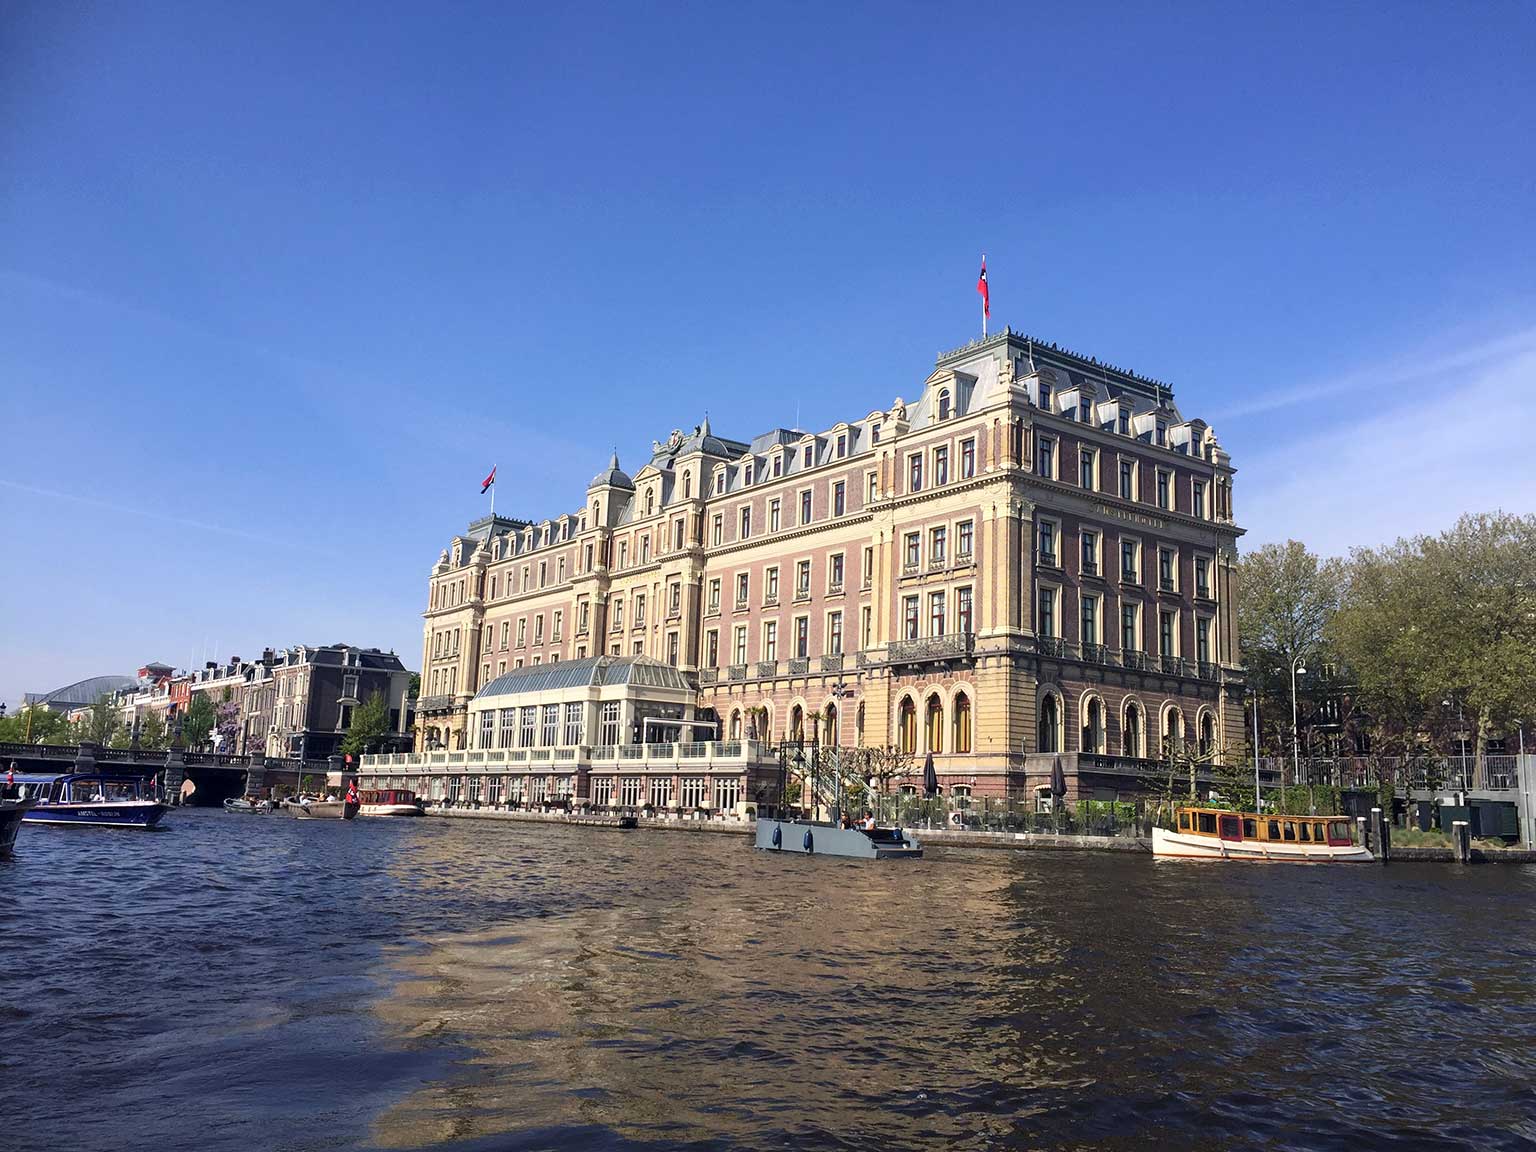 Amstel Hotel, Amsterdam, seen from the Amstel river